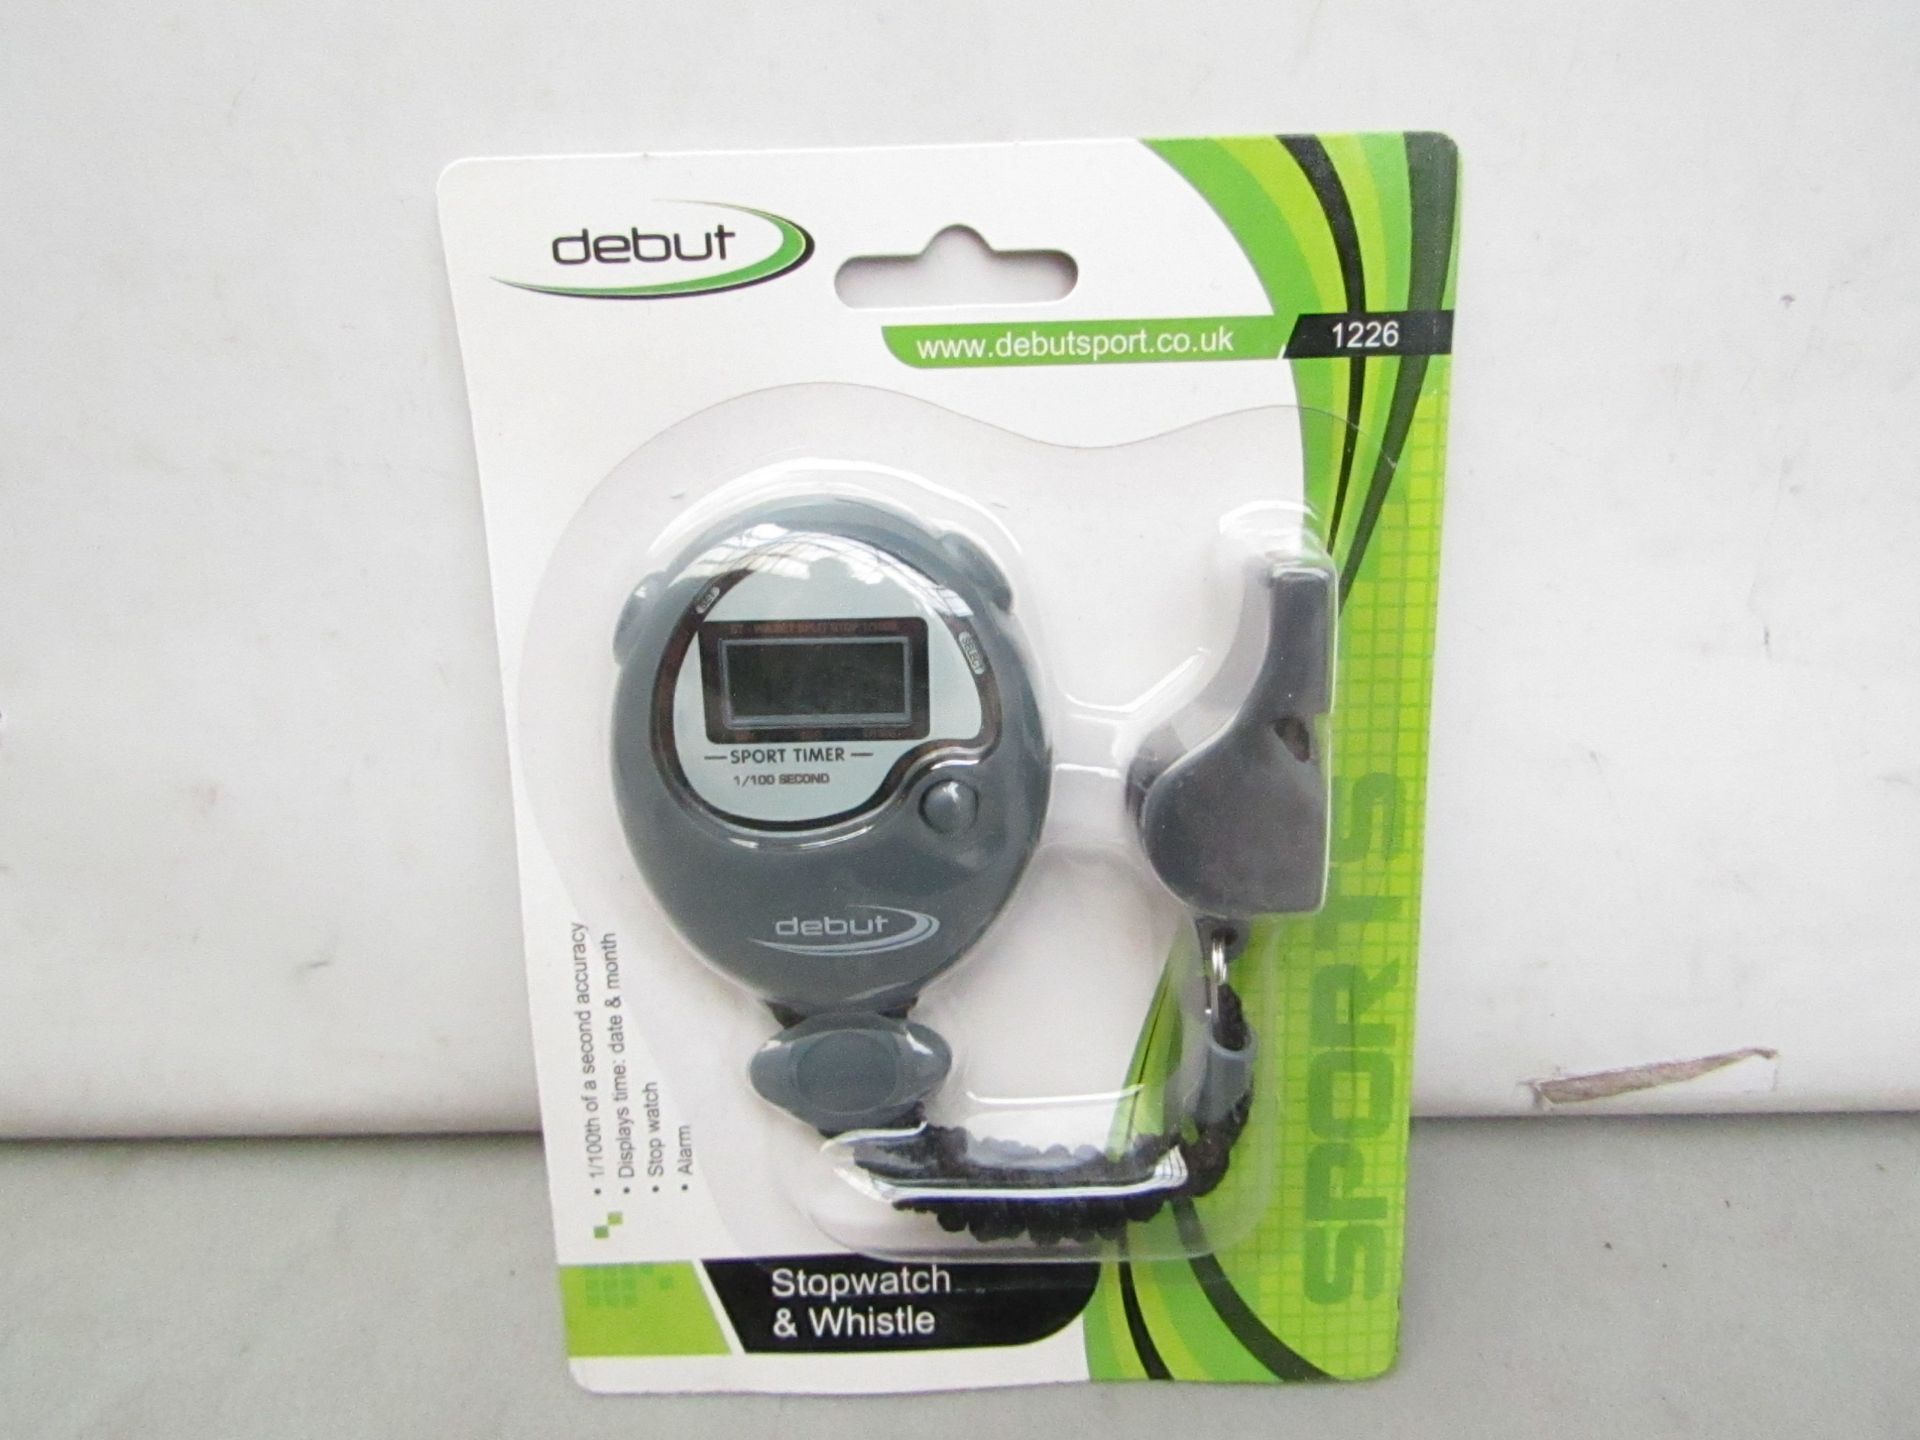 1 X Debut Sport Stopwatch & Whistle new in packaging